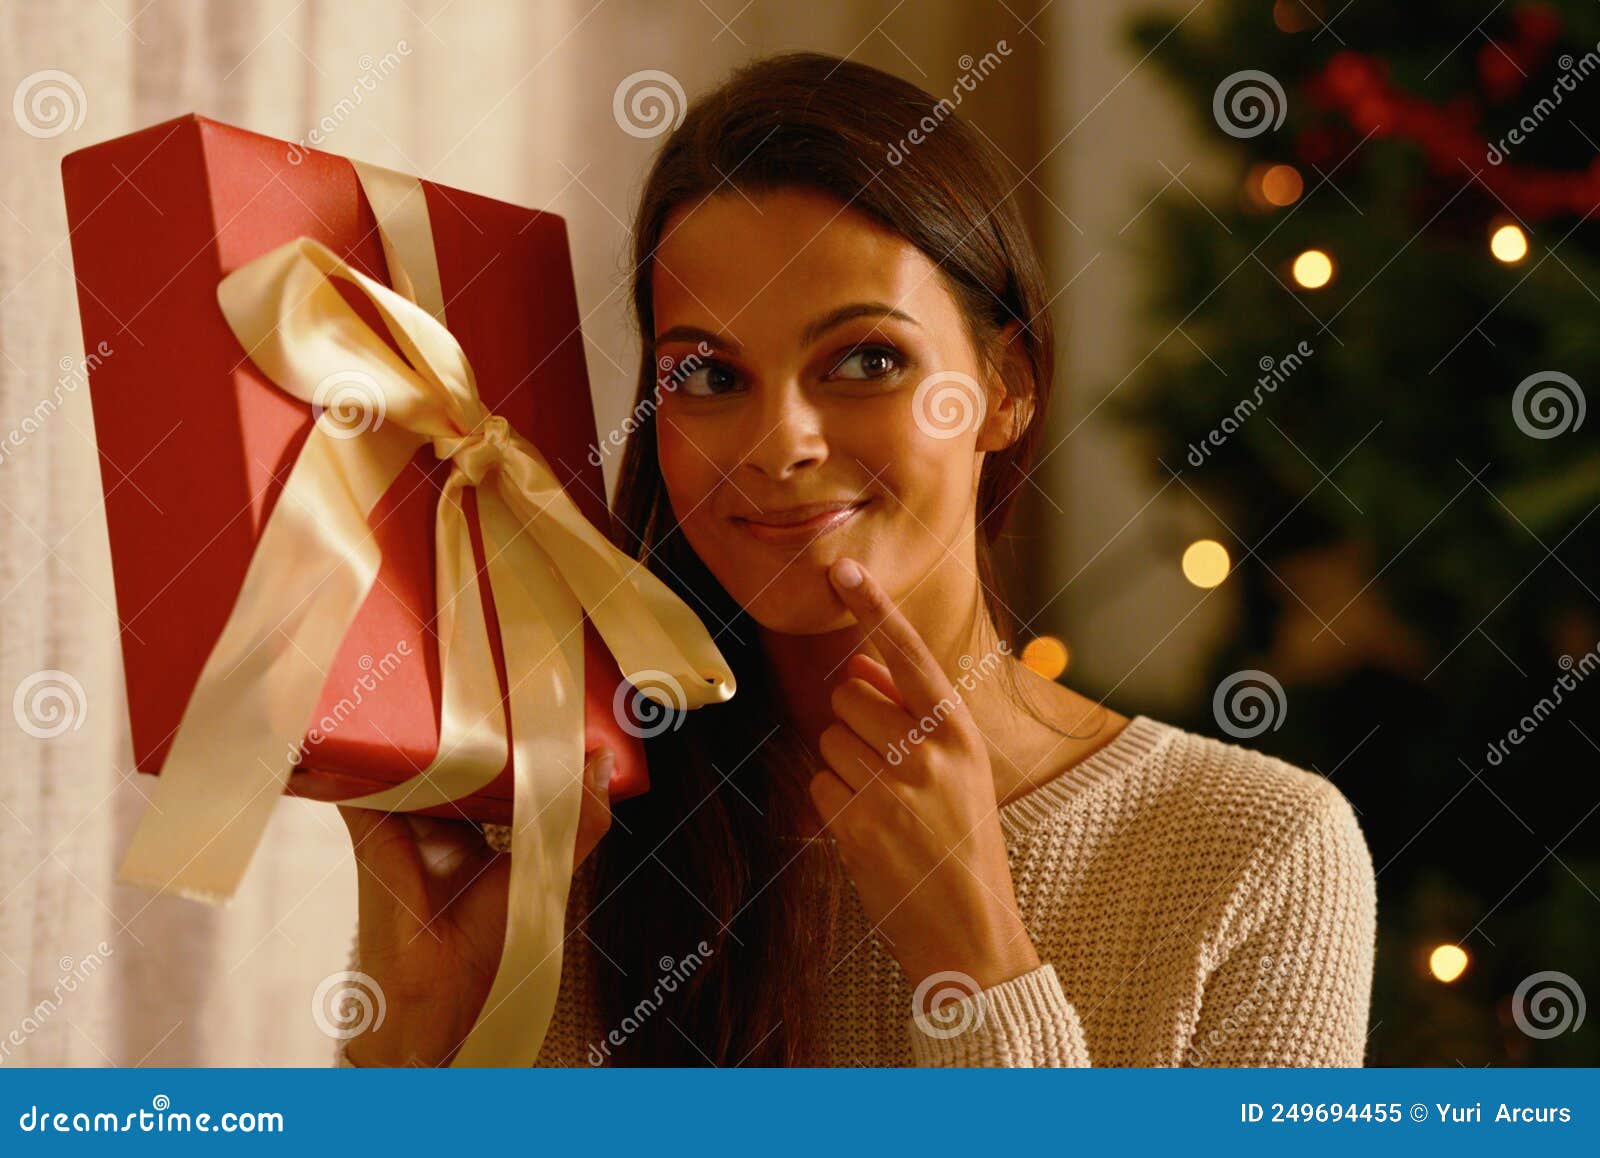 All I Want For Christmas Is You Portrait Of An Attractive Female Pretending She Doesnt Know